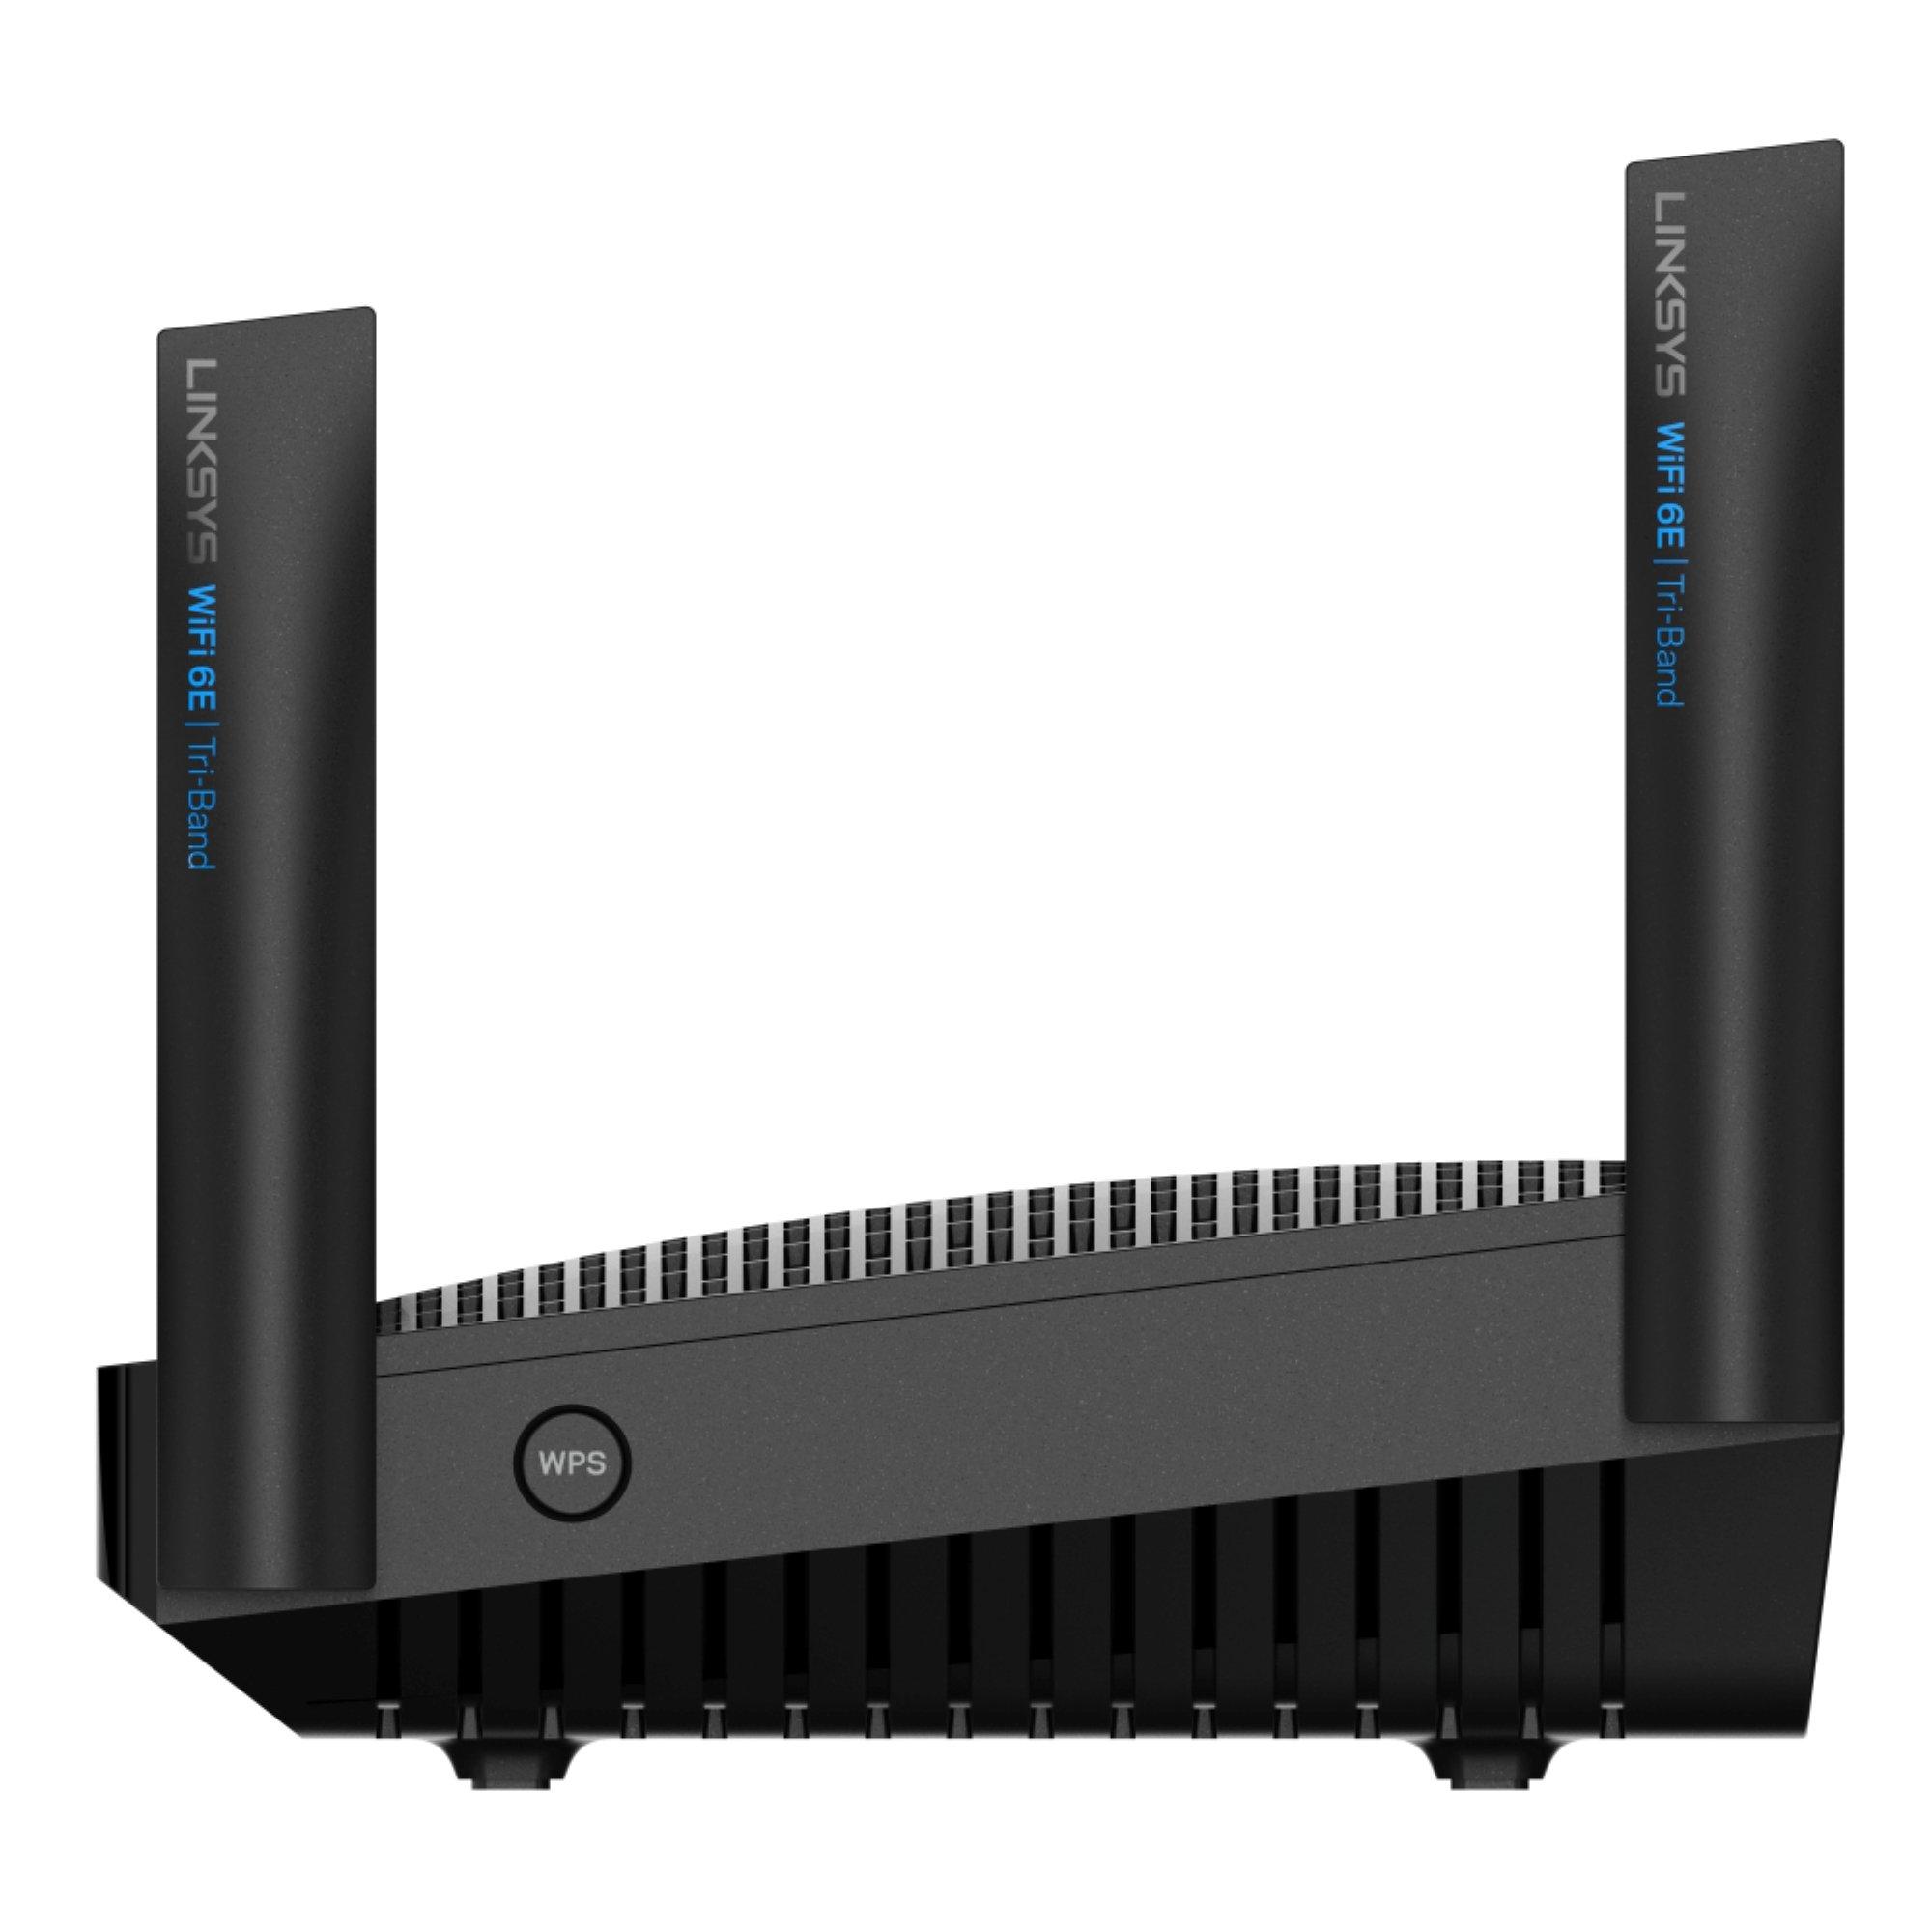 Linksys Hydra Pro AXE6600 Tri-Band Gigabit Wi-Fi Gaming Router MR7500